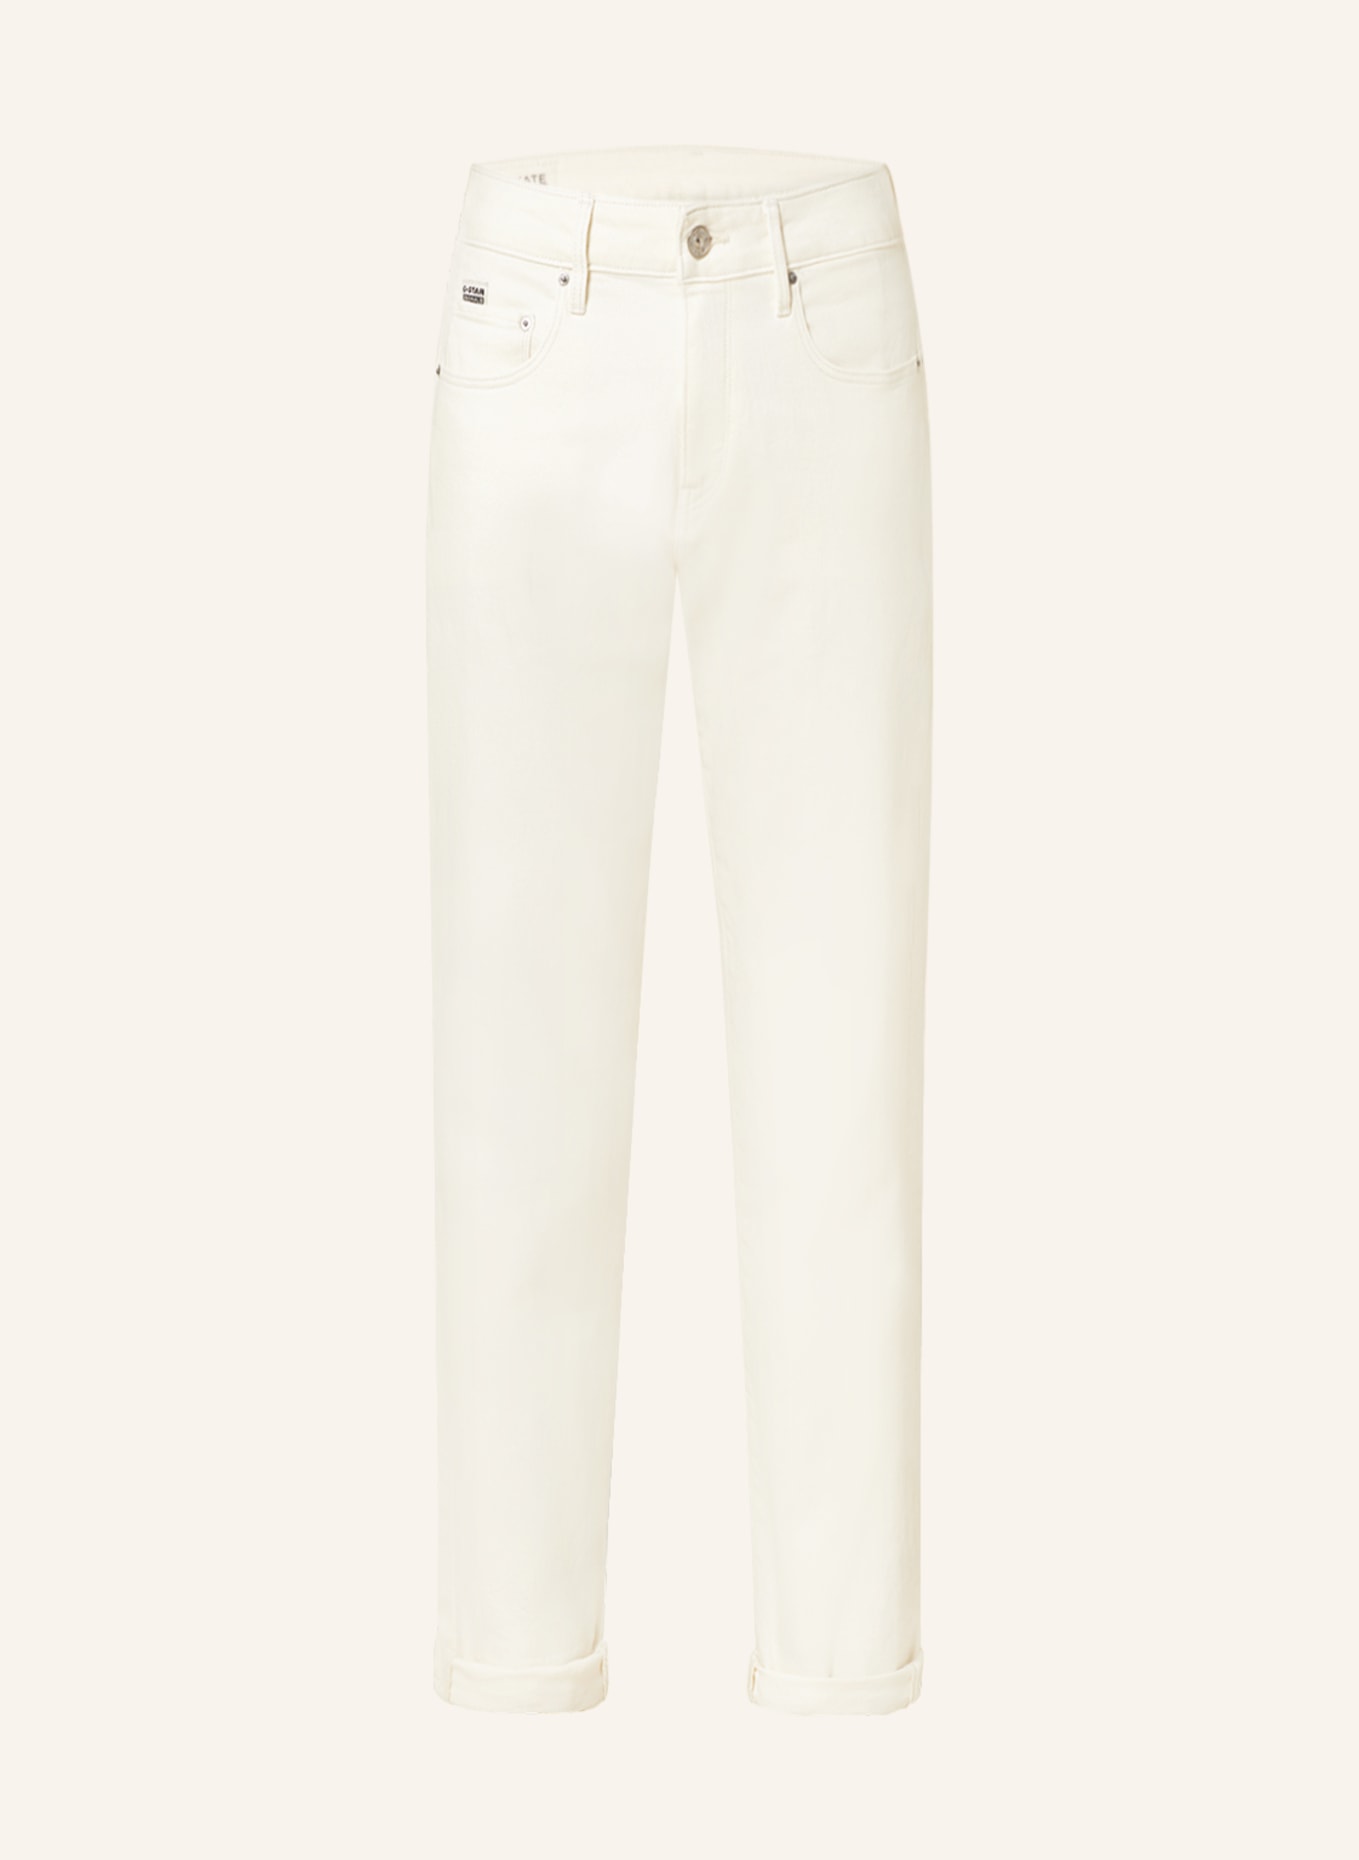 G-Star RAW 7/8 jeans KATE, Color: G547 paper white gd (Image 1)